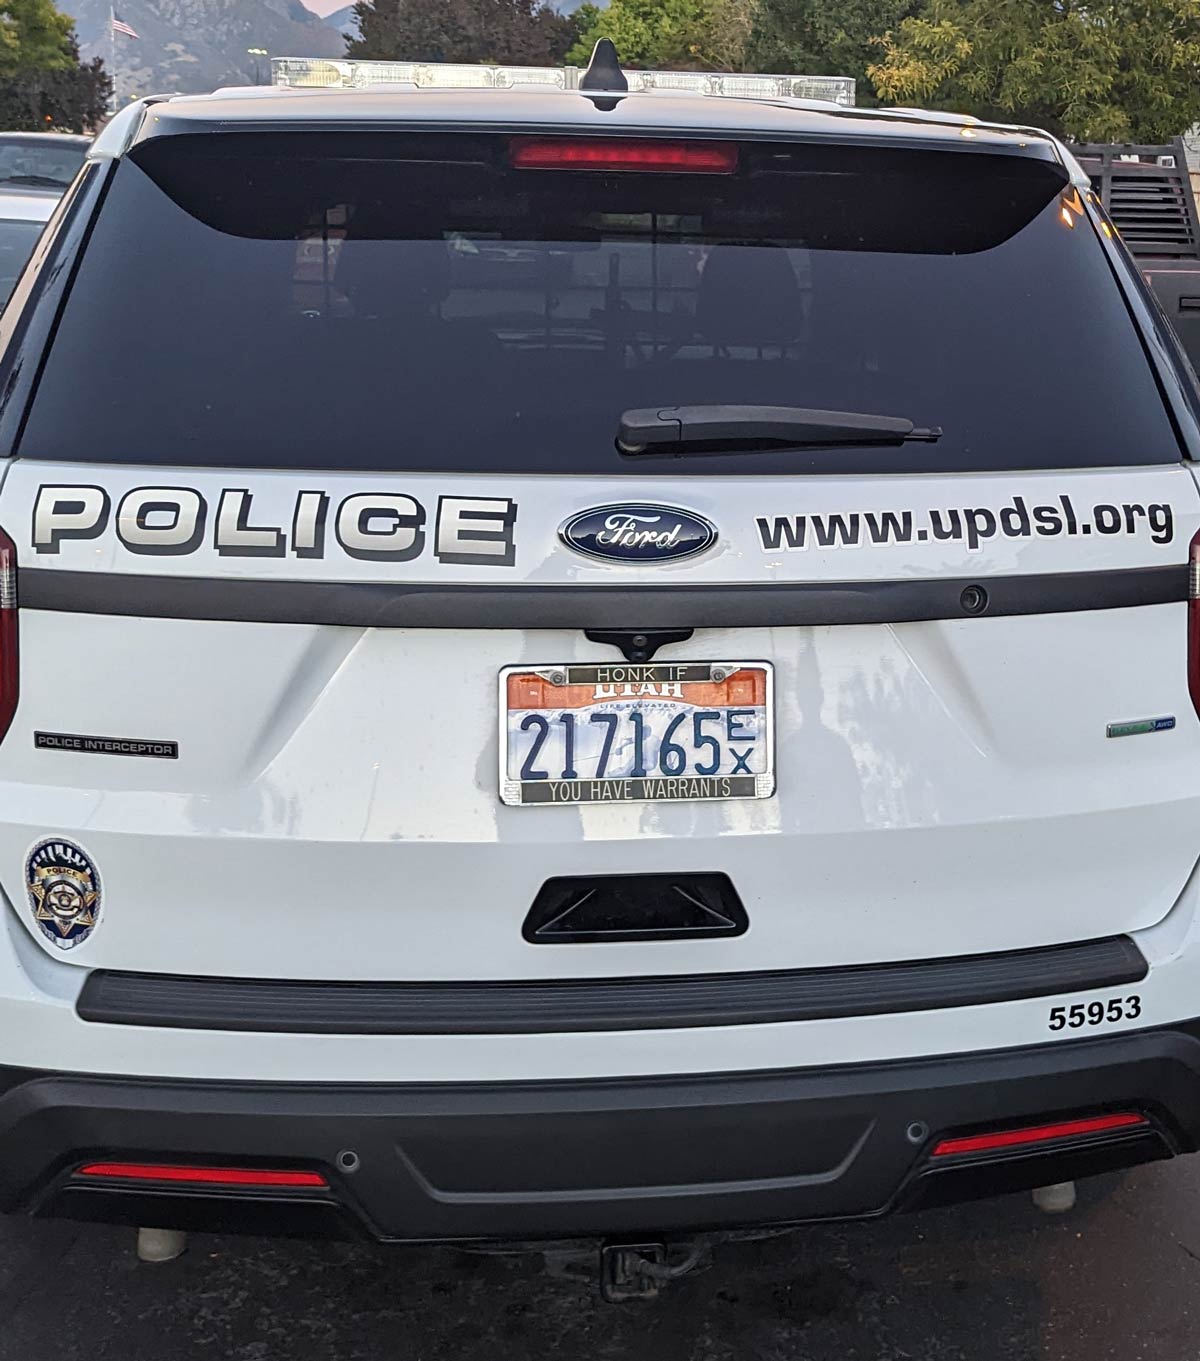 This cop car's plate frame